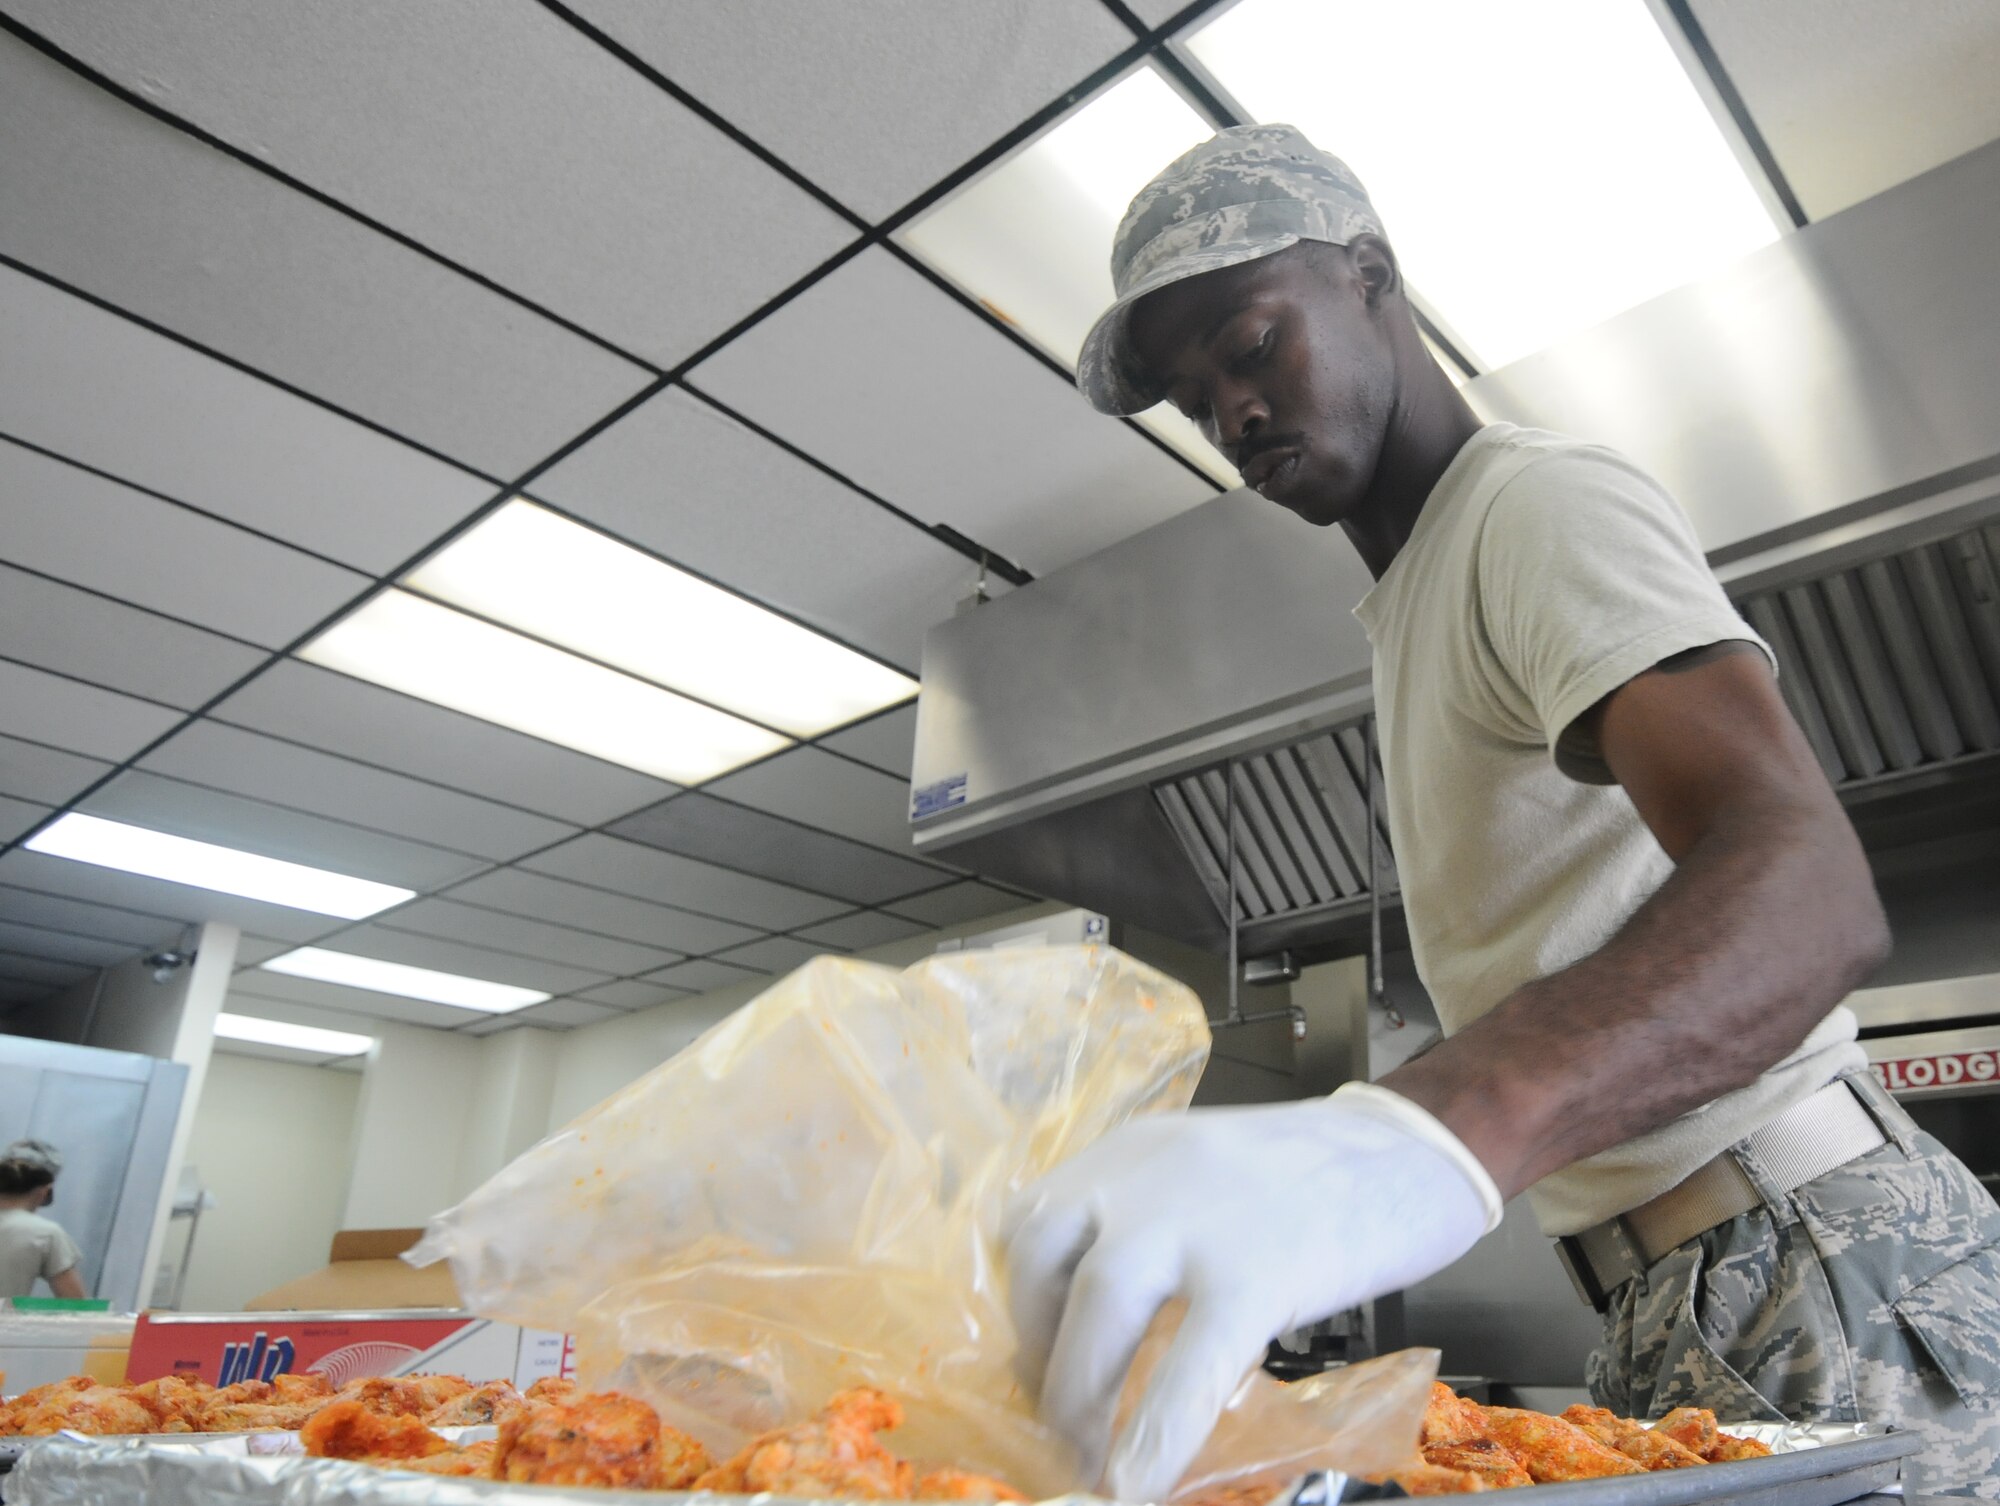 Staff Sgt. Wayne Collins, 36th Force Support Squadron food service supervisor, spreads chicken out evenly on a baking tray June 12, 2013, on Andersen Air Force Base, Guam. The Skyline Flight Kitchen prepares approximately 700 boxed lunches and 1,000 hot meals per week. (U.S. Air Force photo by Airman 1st Class Emily A. Bradley/Released)